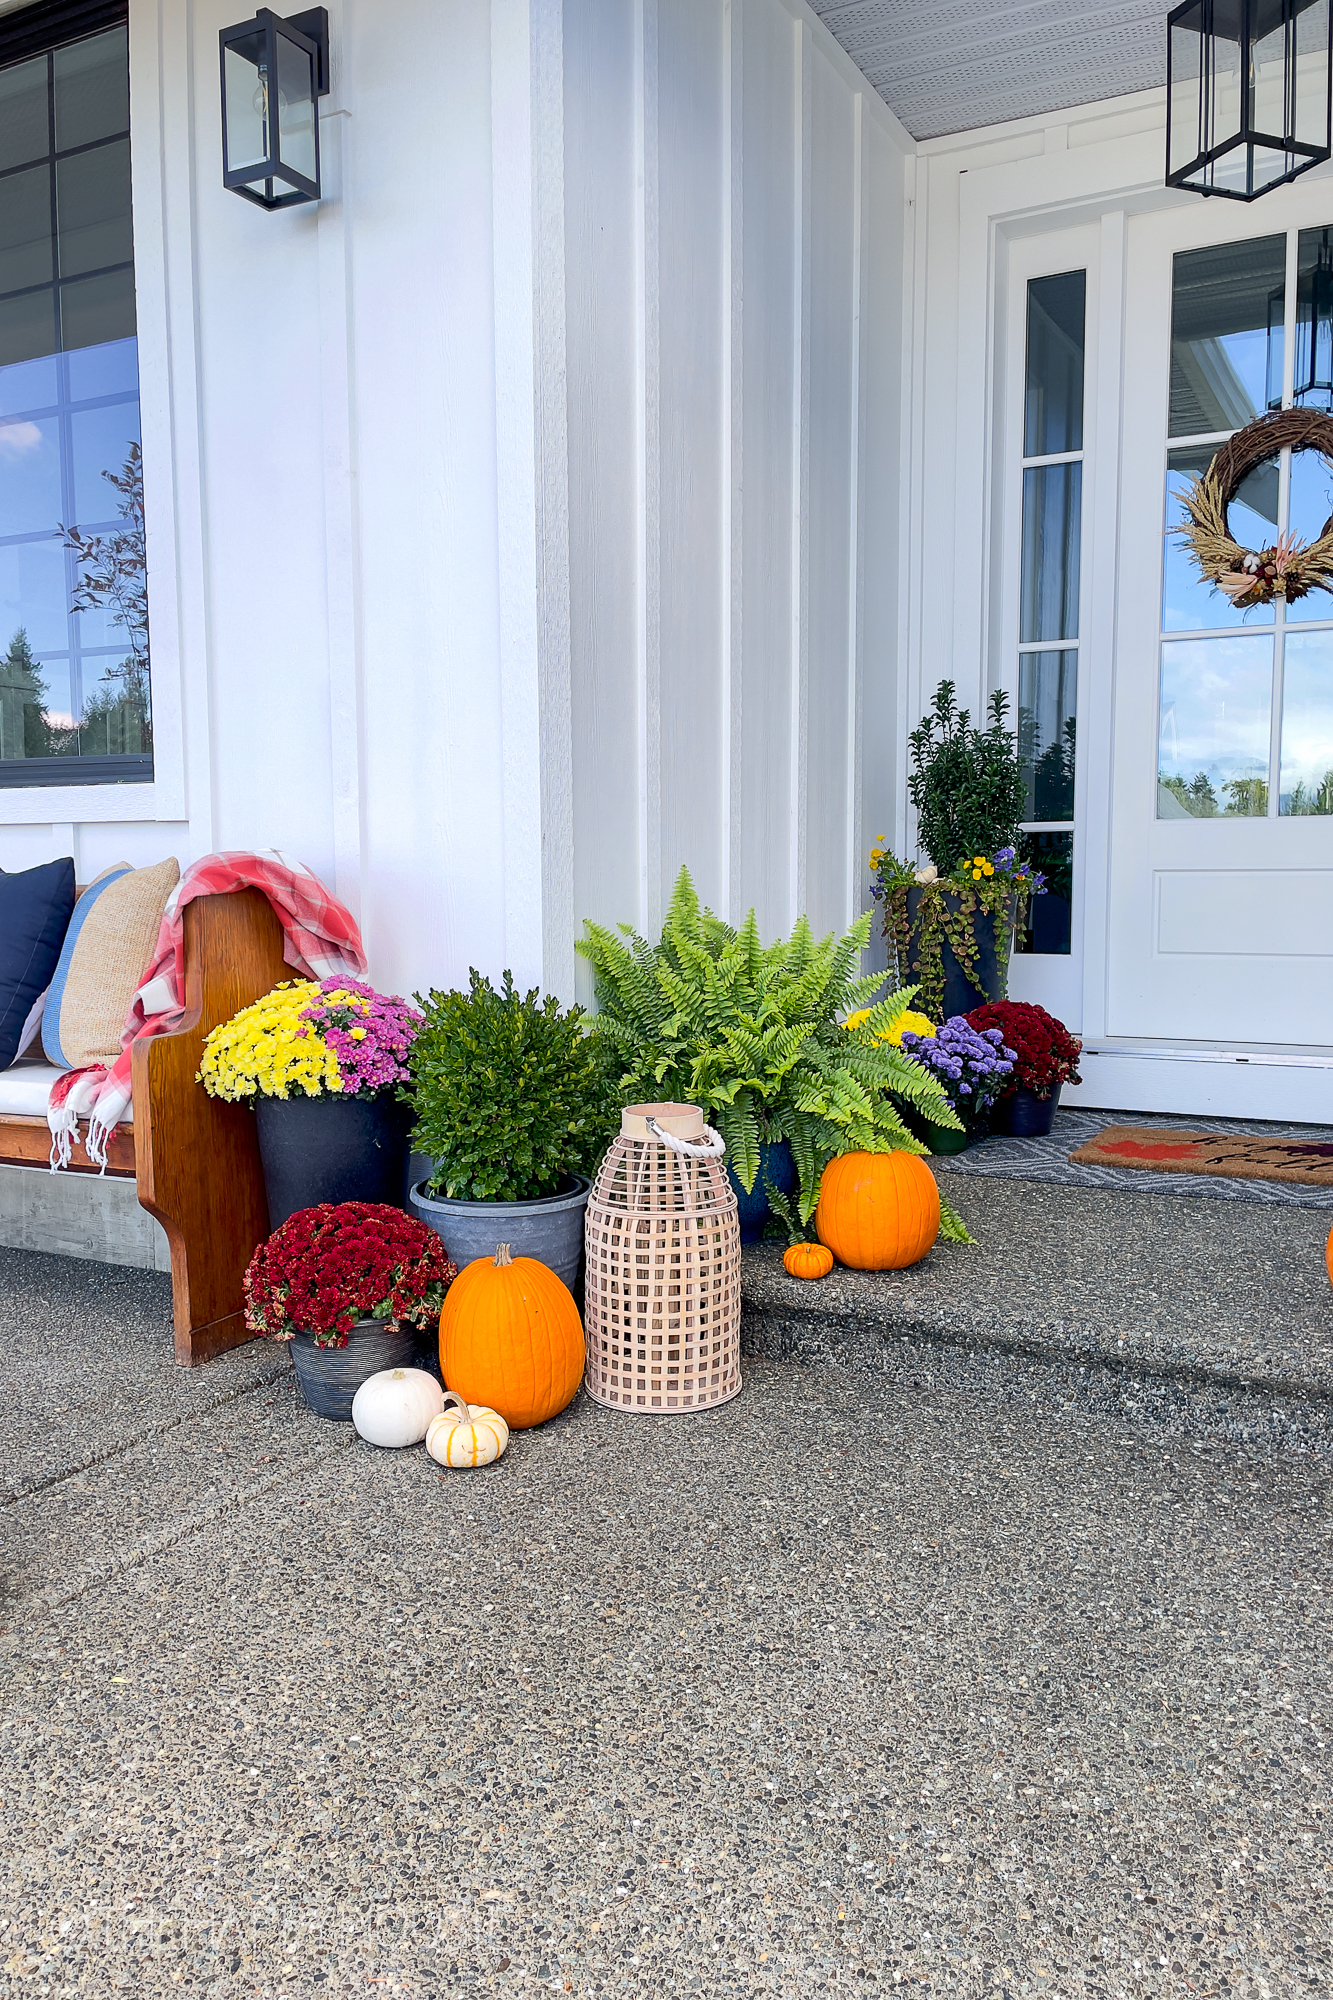 There are pumpkins and containers with flowers on the porch.